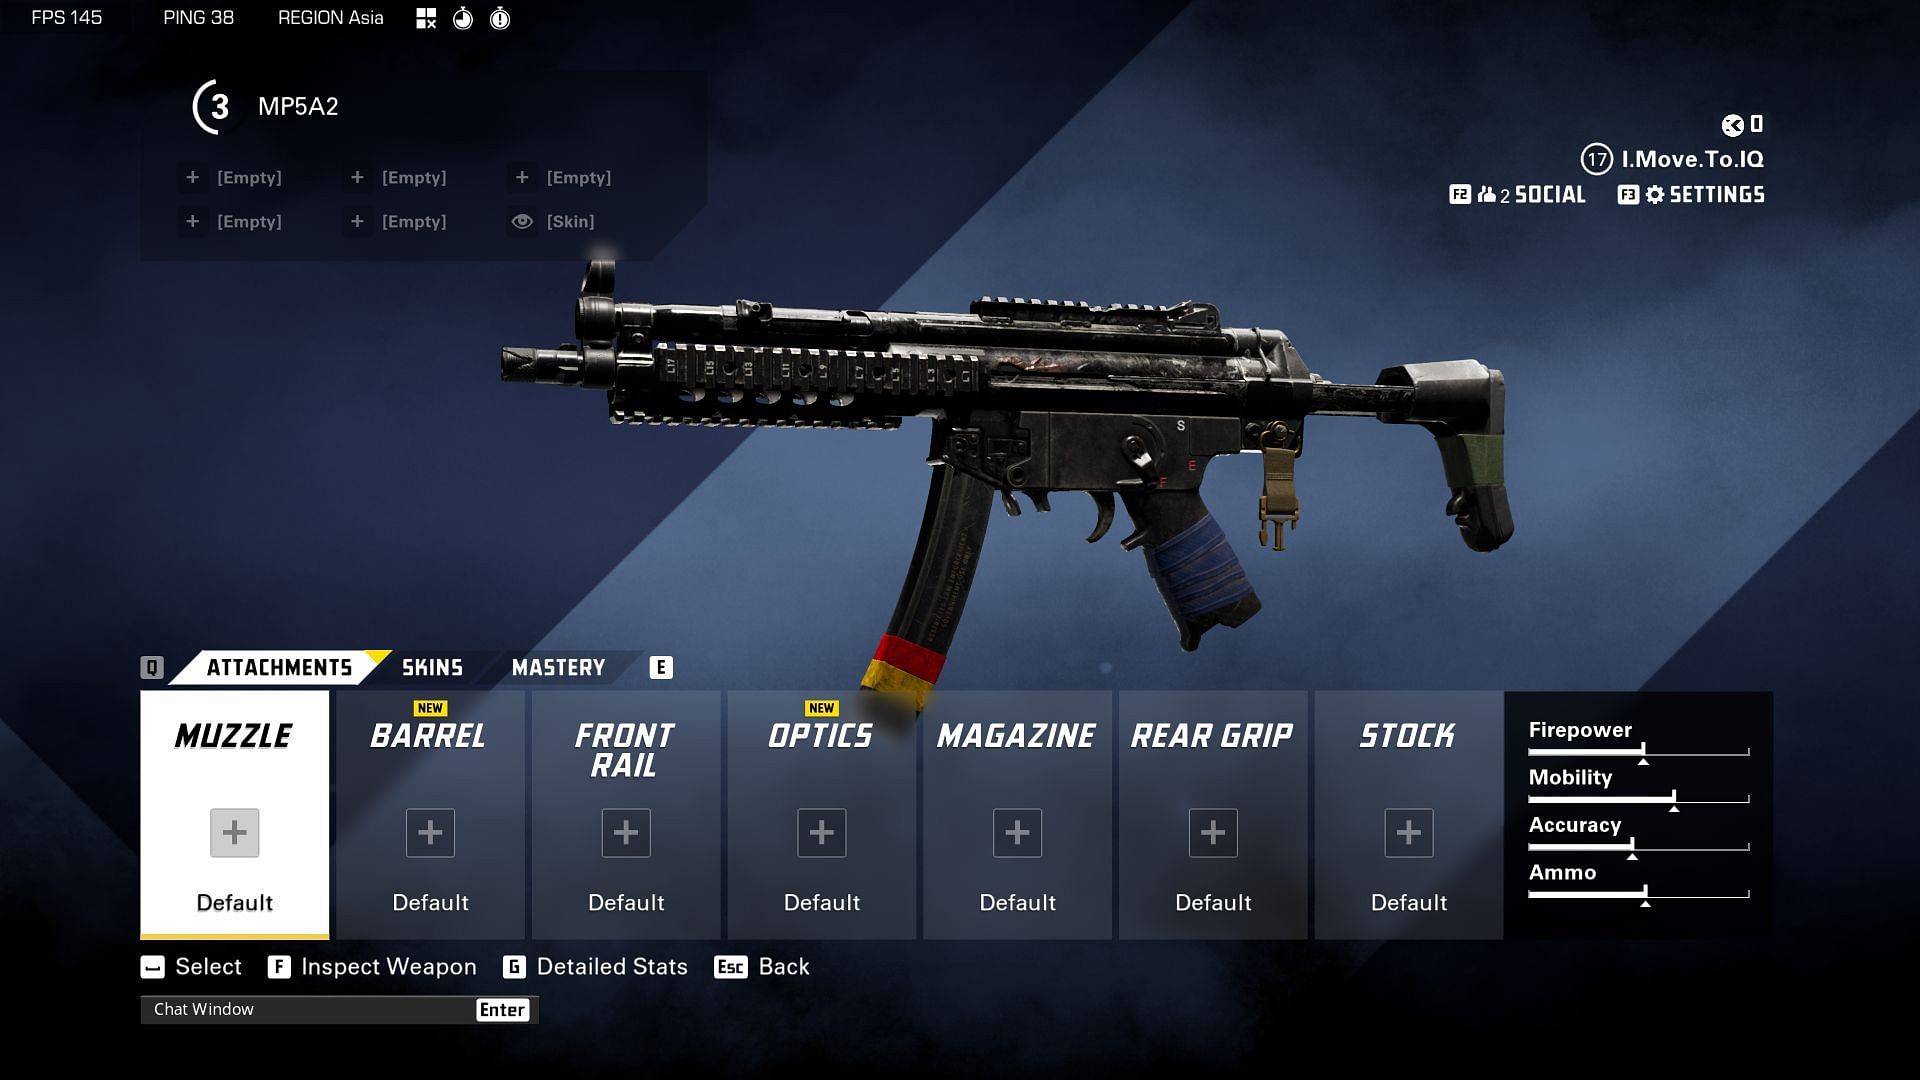 MP5A2 is another alternative for MP7 SMG in XDefiant. (Image via Ubisoft)